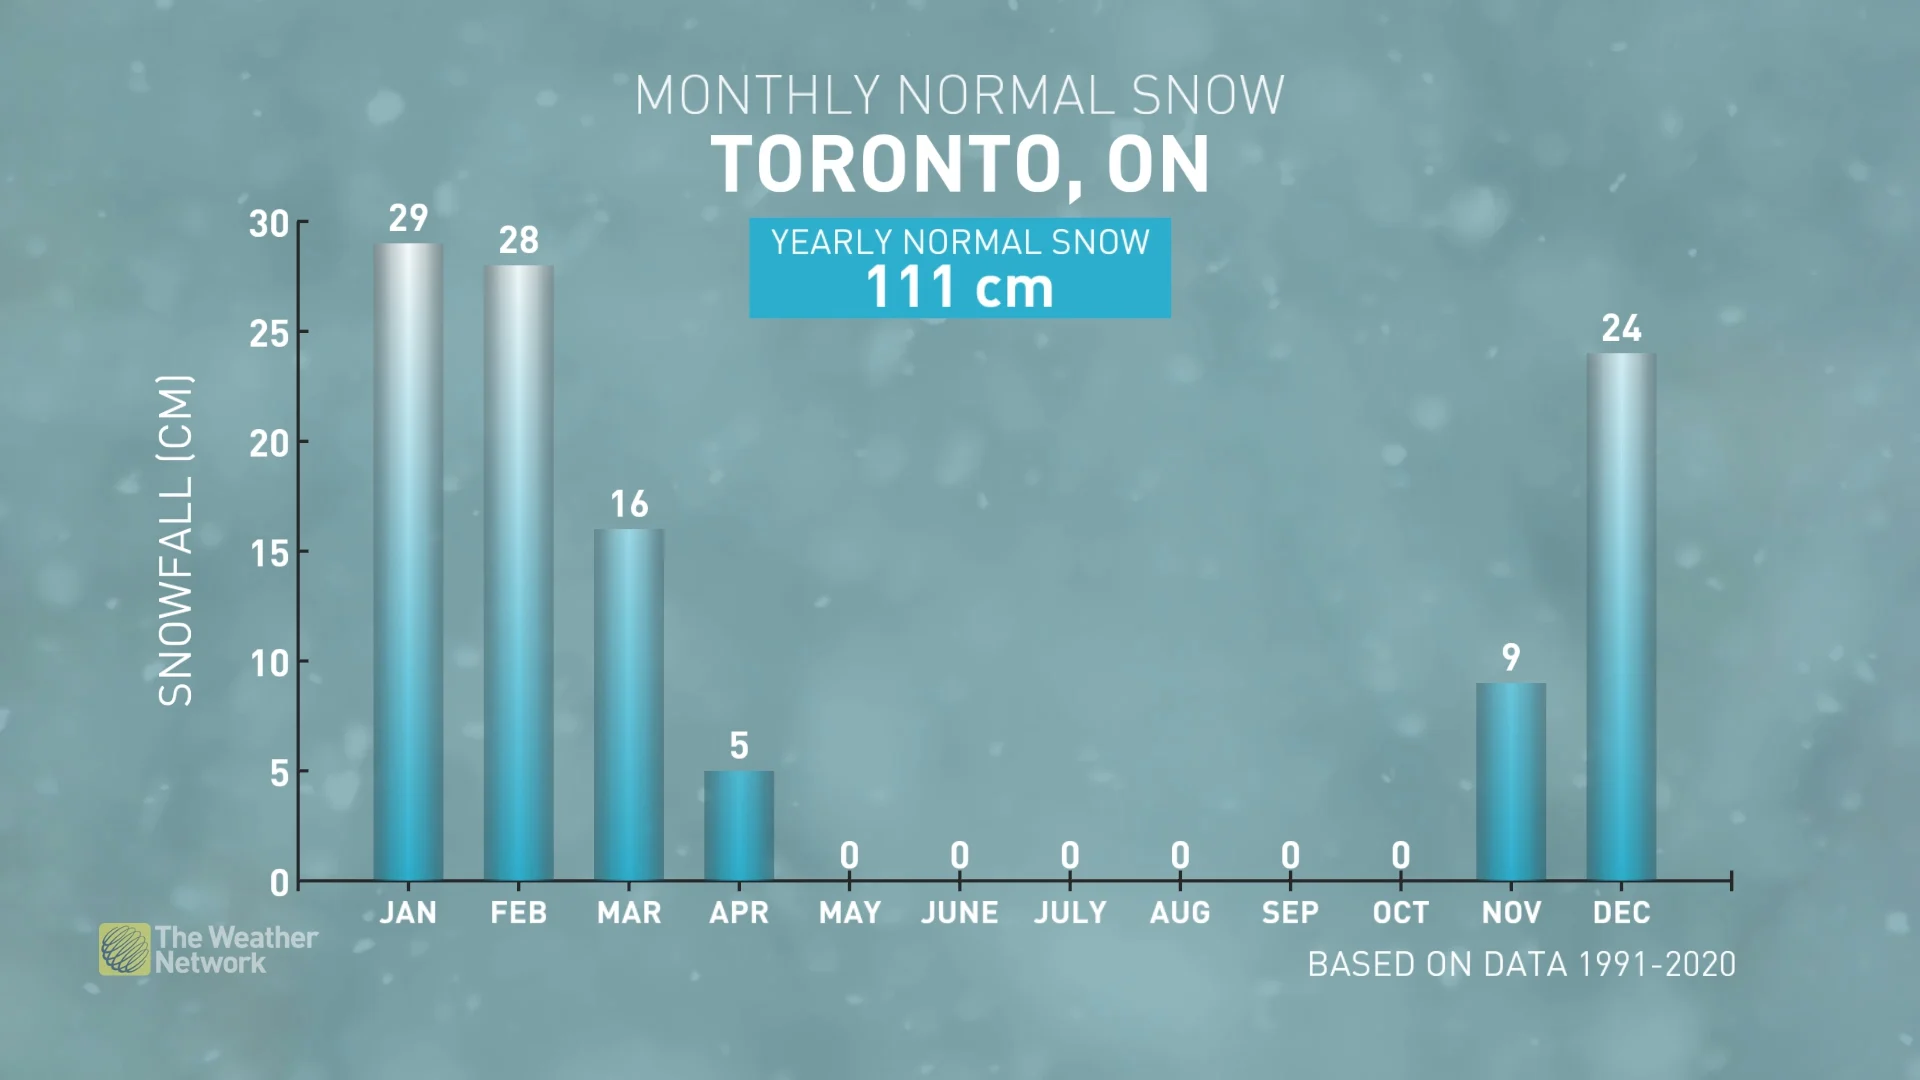 Toronto monthly normals snowfall totals. Winter forecast 2022-23